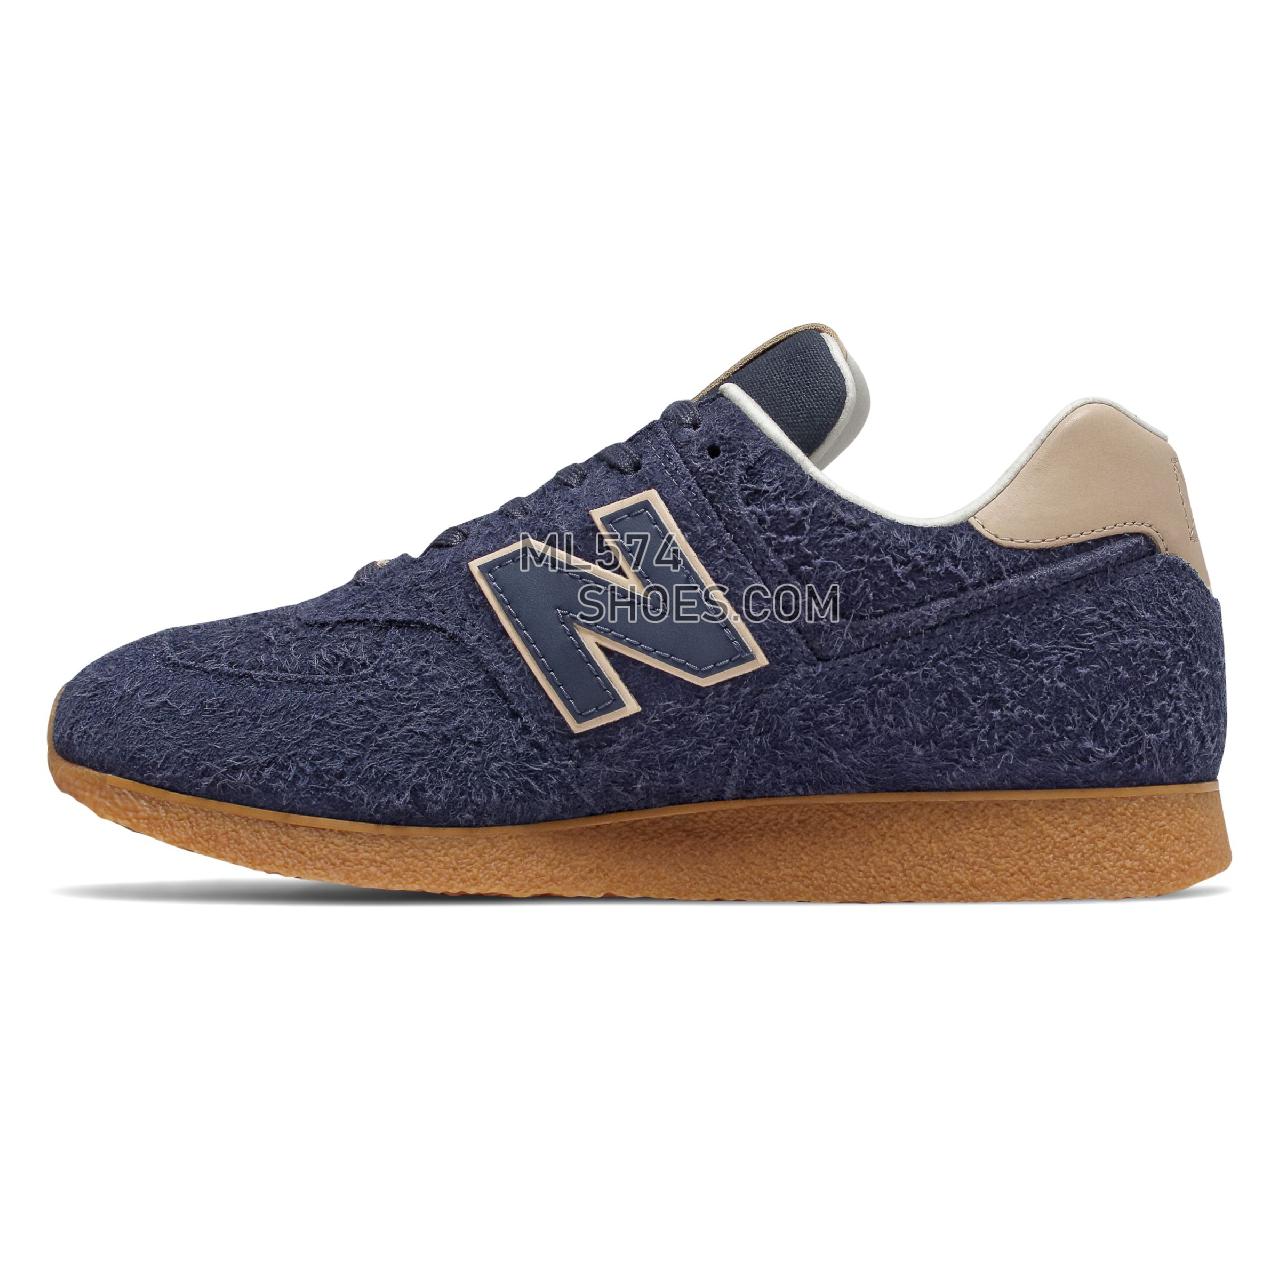 New Balance 574A - Men's Classic Sneakers - Navy with Veg Tan - ML574ANC